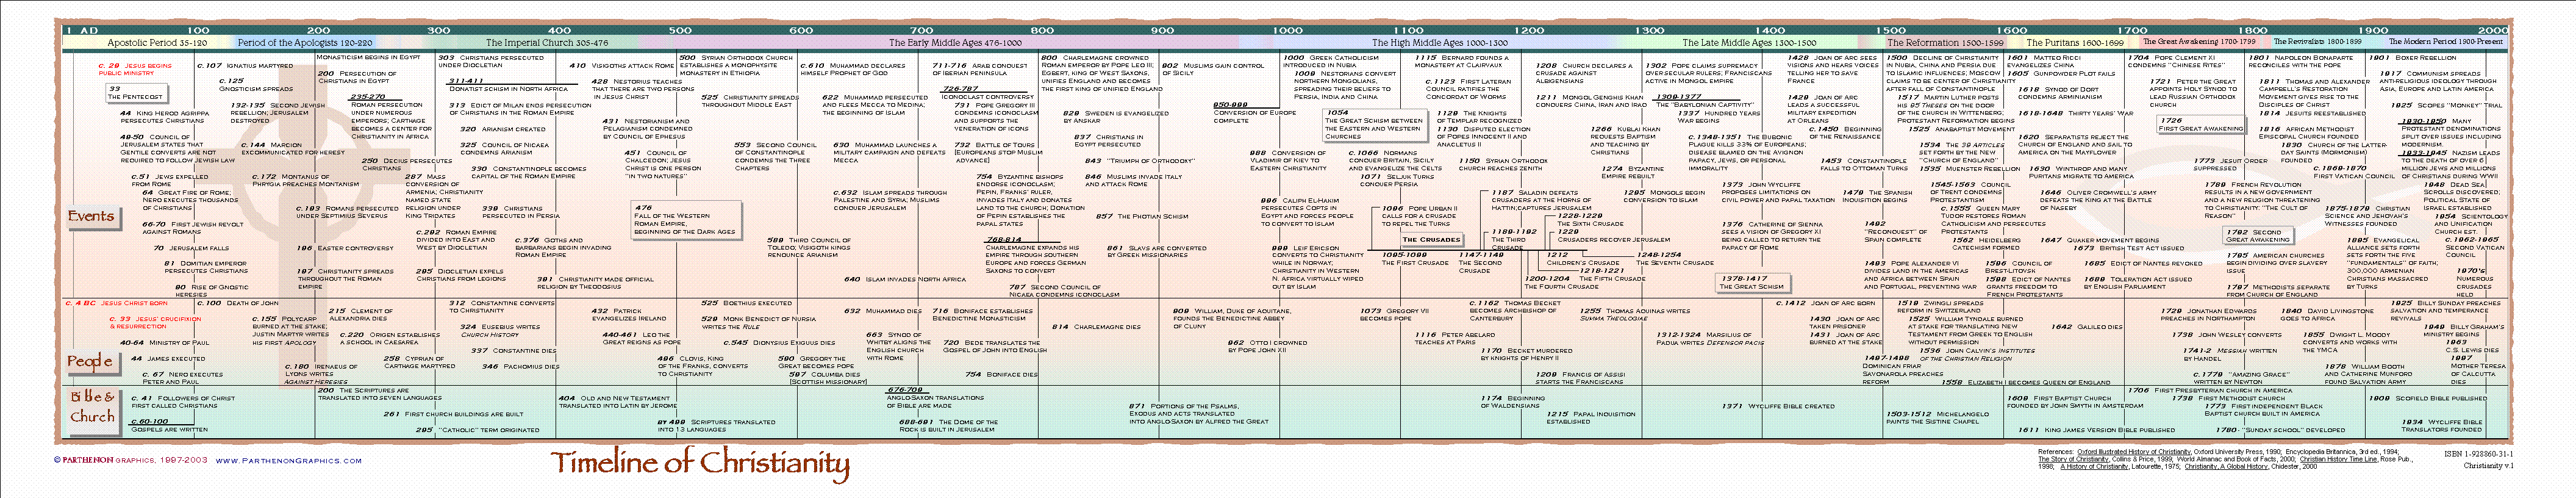 bible project timeline